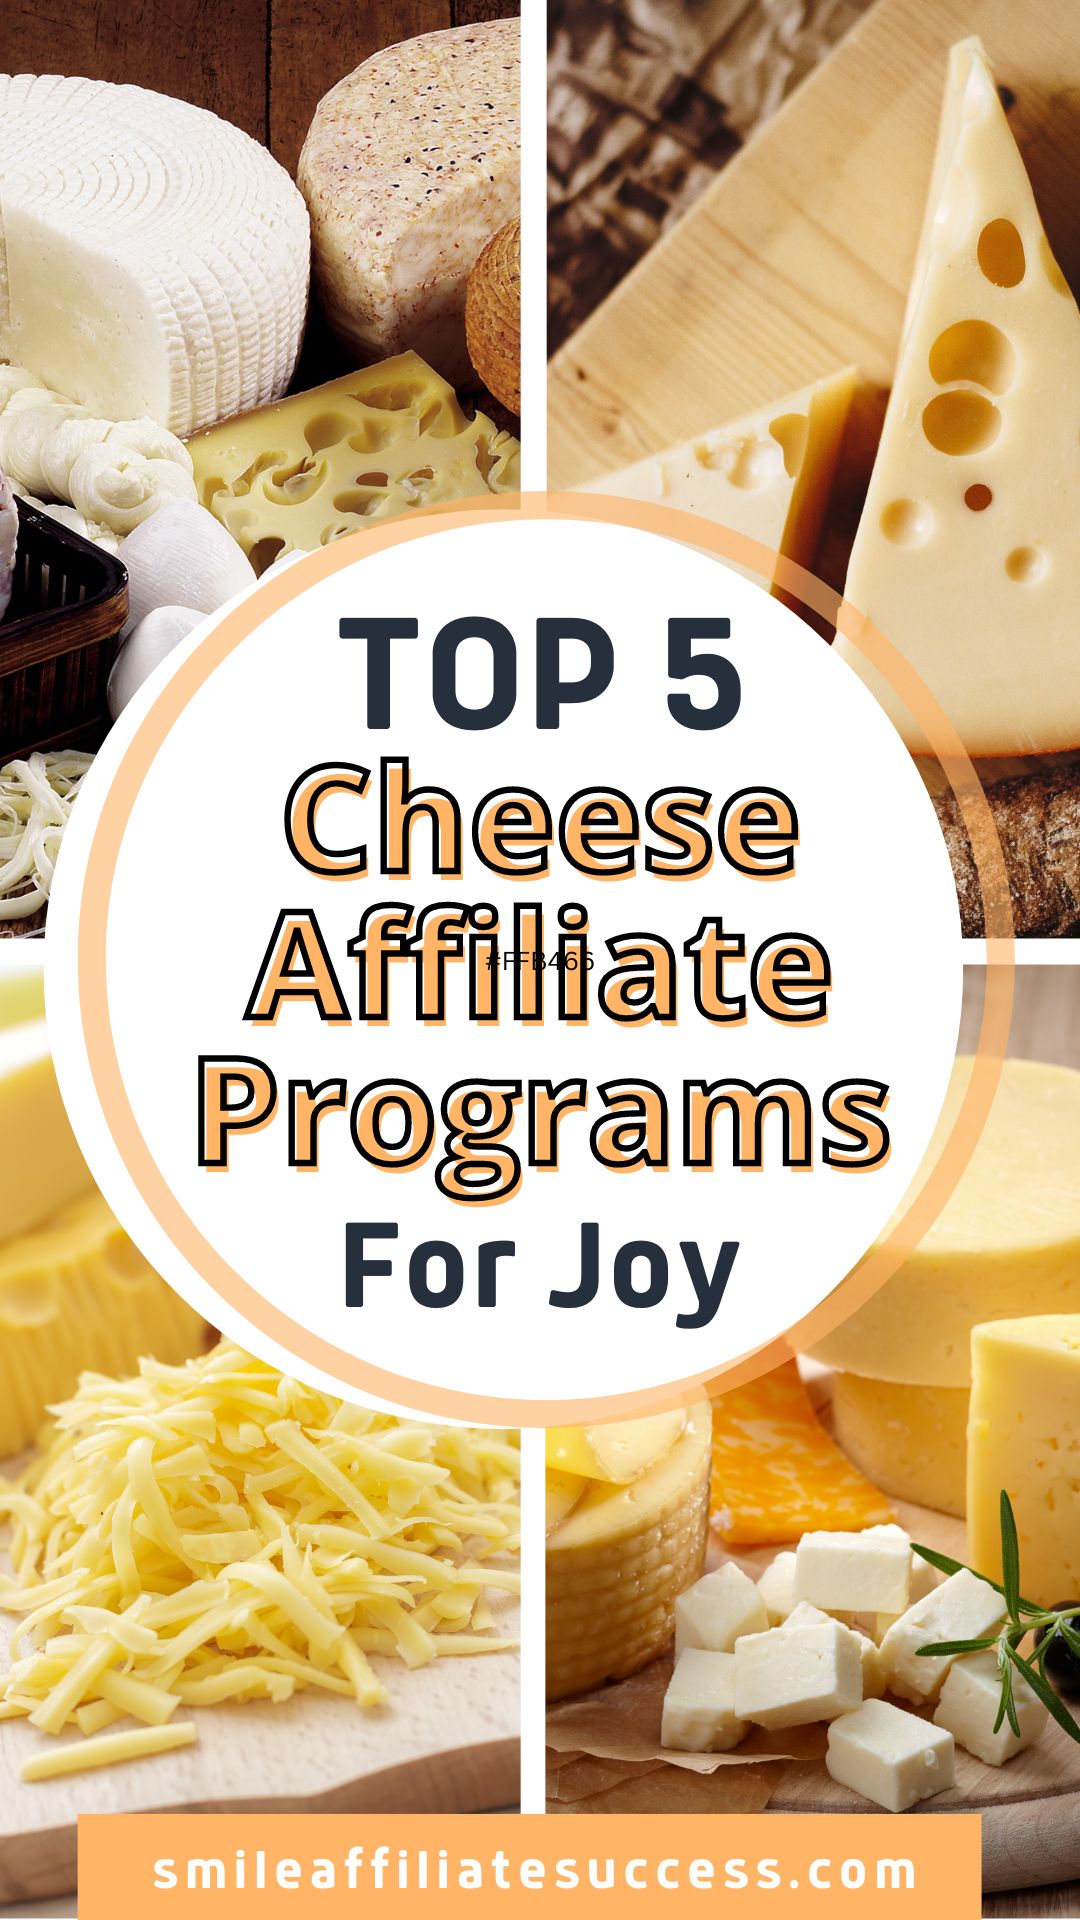 Top 5 Cheese Affiliate Programs